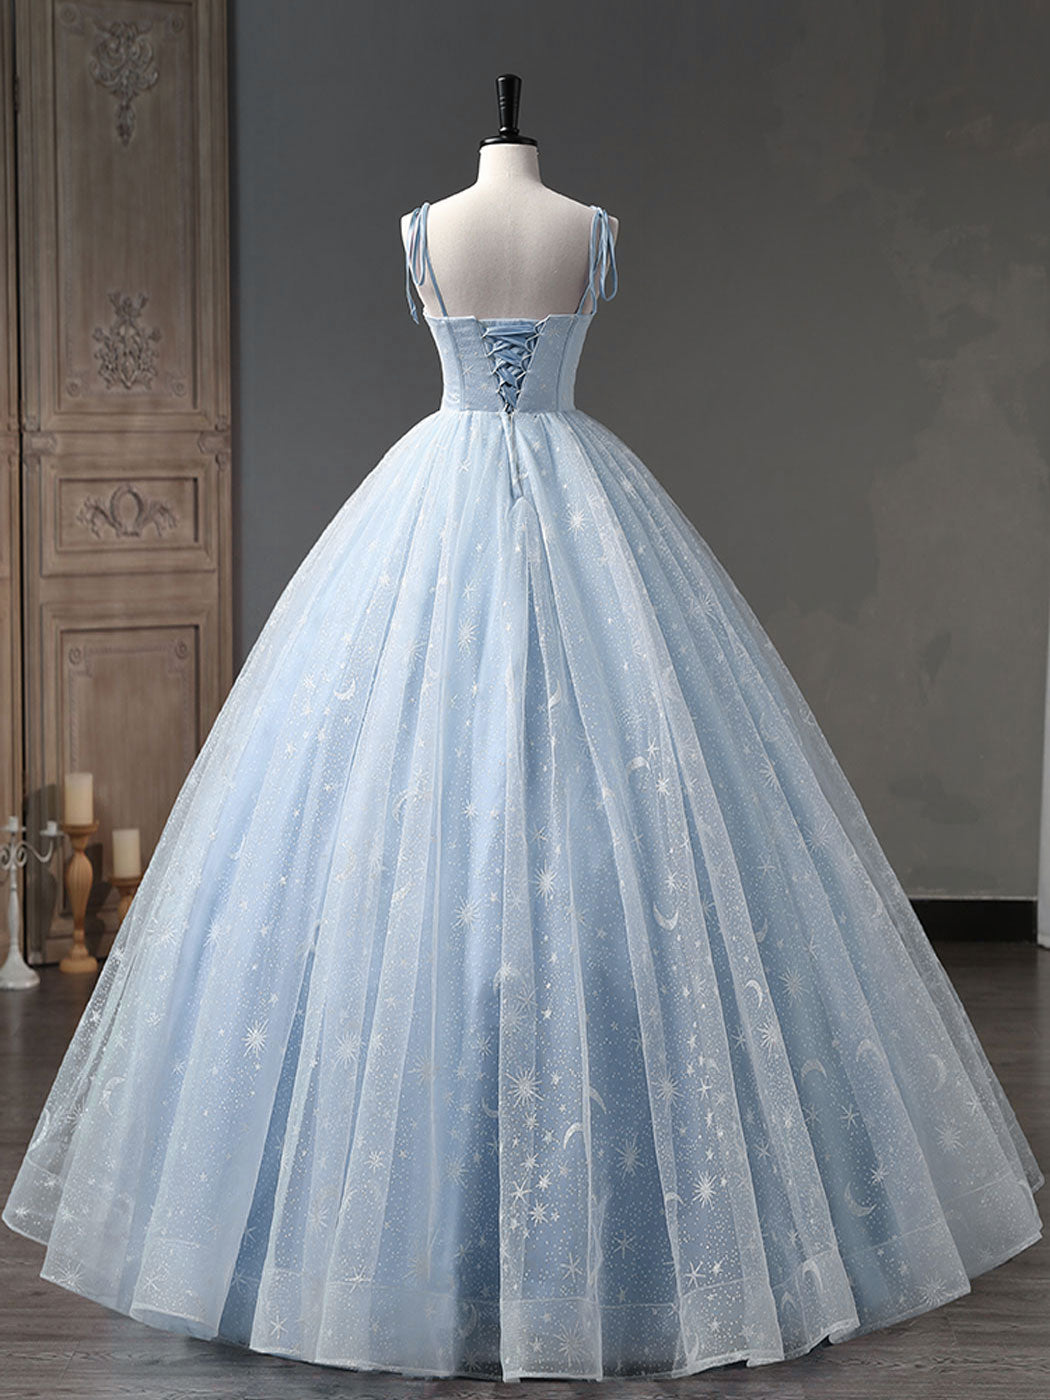 Blue Tulle Ball Gown Sweet 16 Dresses Lace Beaded Sequins Draped Sweetheart  Lace Up Prom Dress 8th Grade Graduation Quinceanera Dresses Long From 88,16  € | DHgate